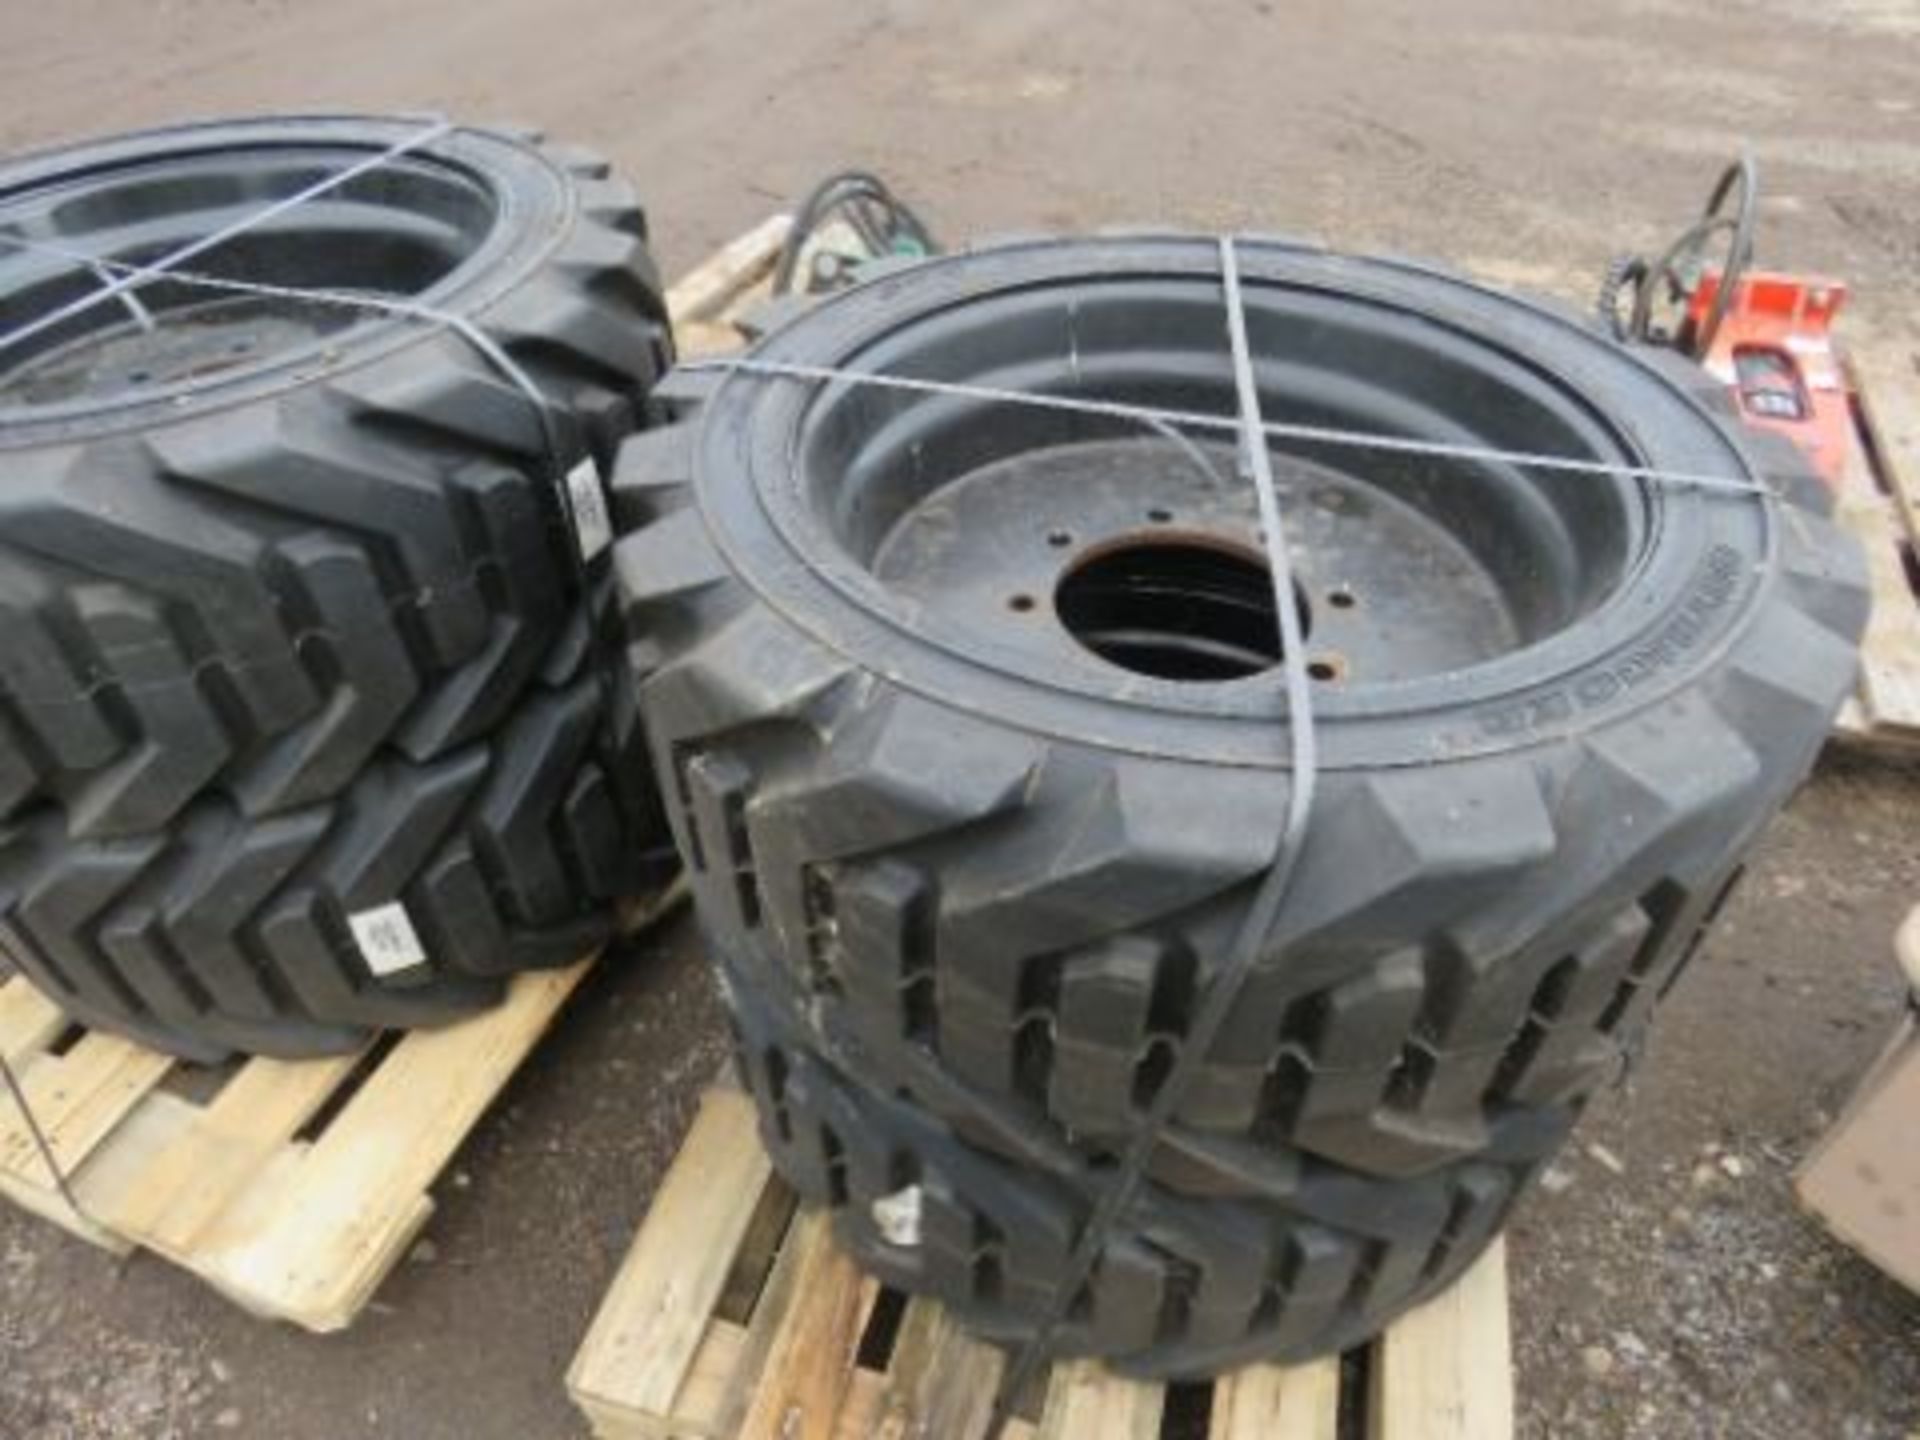 SET OF 4NO ACCESS PLATFORM WHEELS AND TYRES, UNUSED. 8 STUD RIMS, 335/55D625NHS TYRES. SOURCED FROM